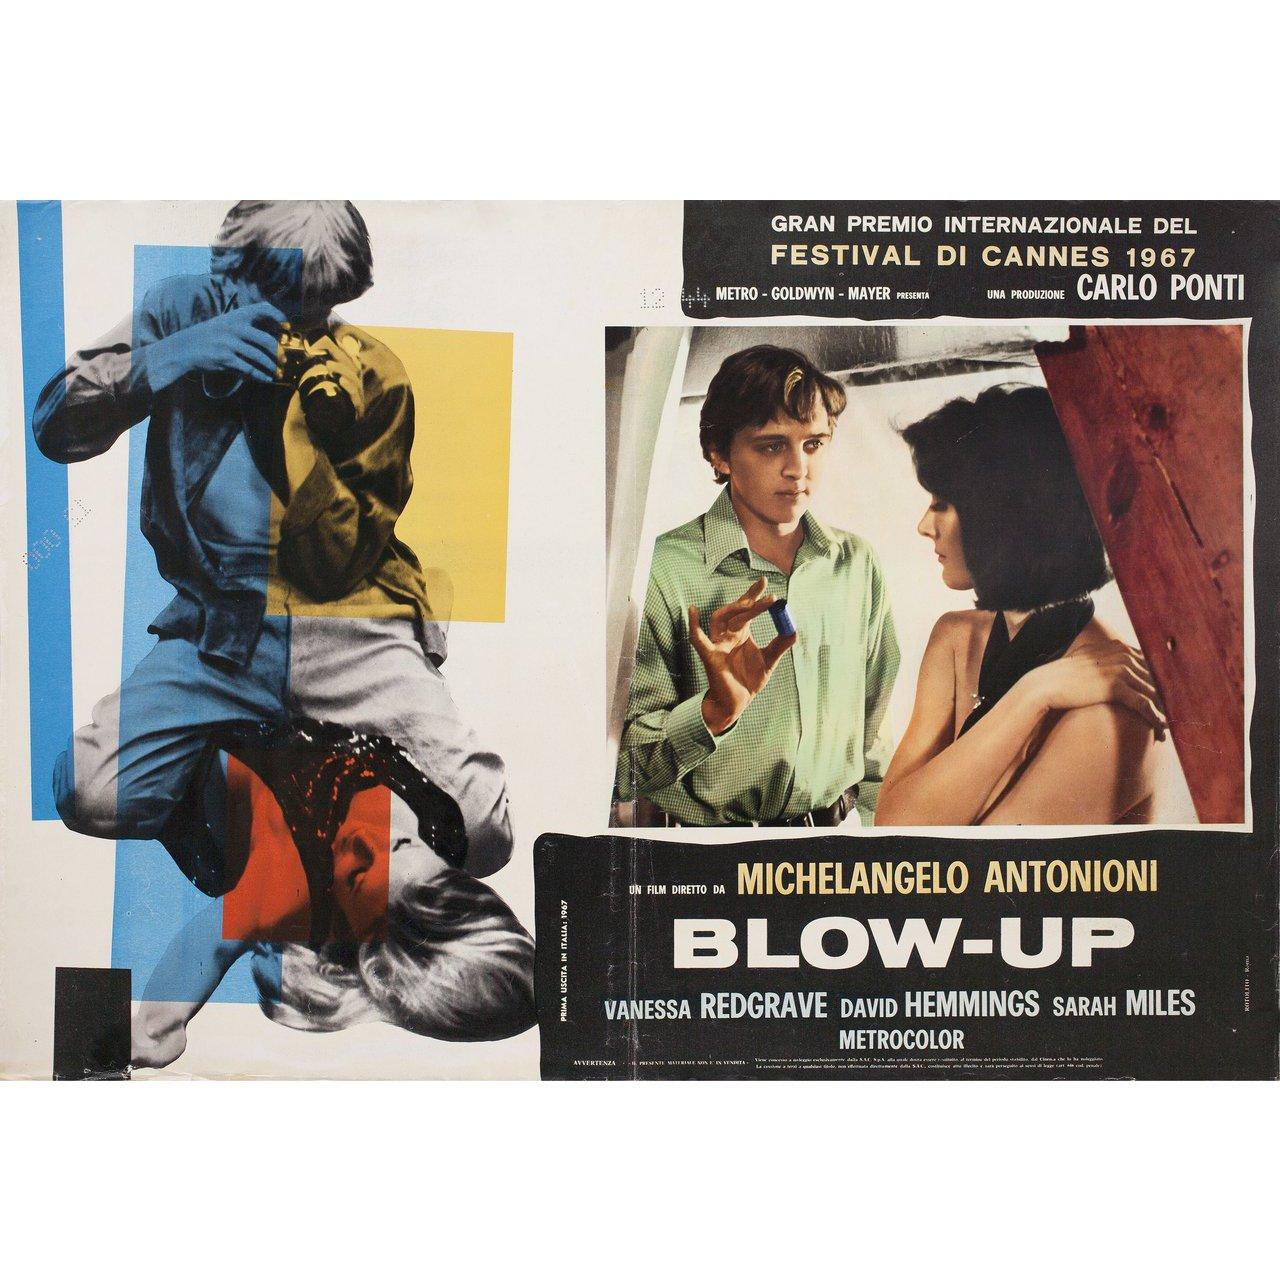 Original 1968 Italian fotobusta poster for the film Blow-Up (Blow Up) directed by Michelangelo Antonioni with Vanessa Redgrave / Sarah Miles / David Hemmings / John Castle. Very Good-Fine condition, folded. Many original posters were issued folded